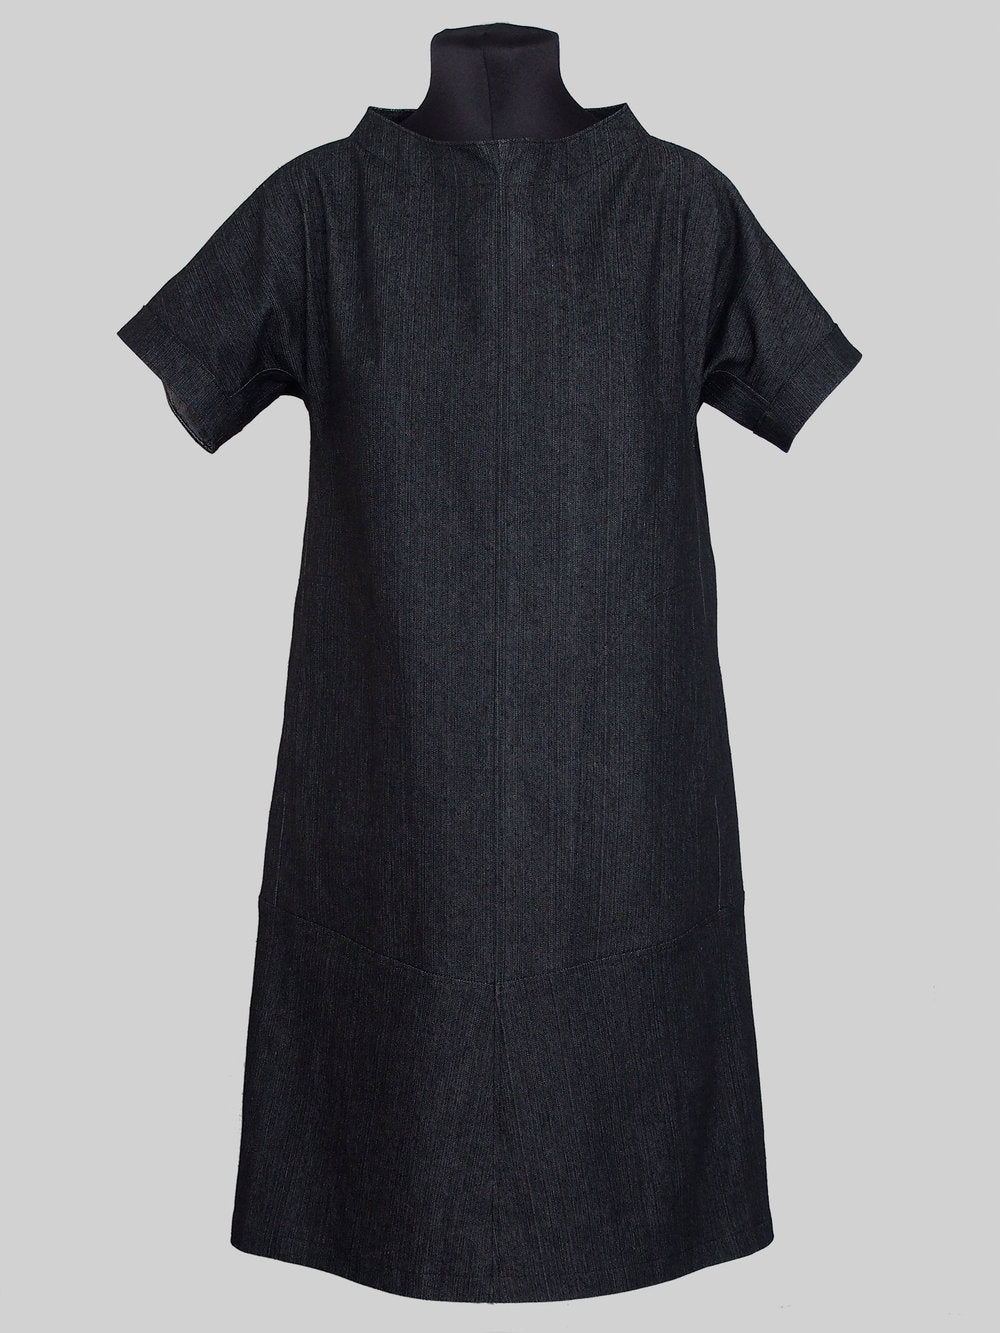 The Assembly Line Cap Sleeve Dress